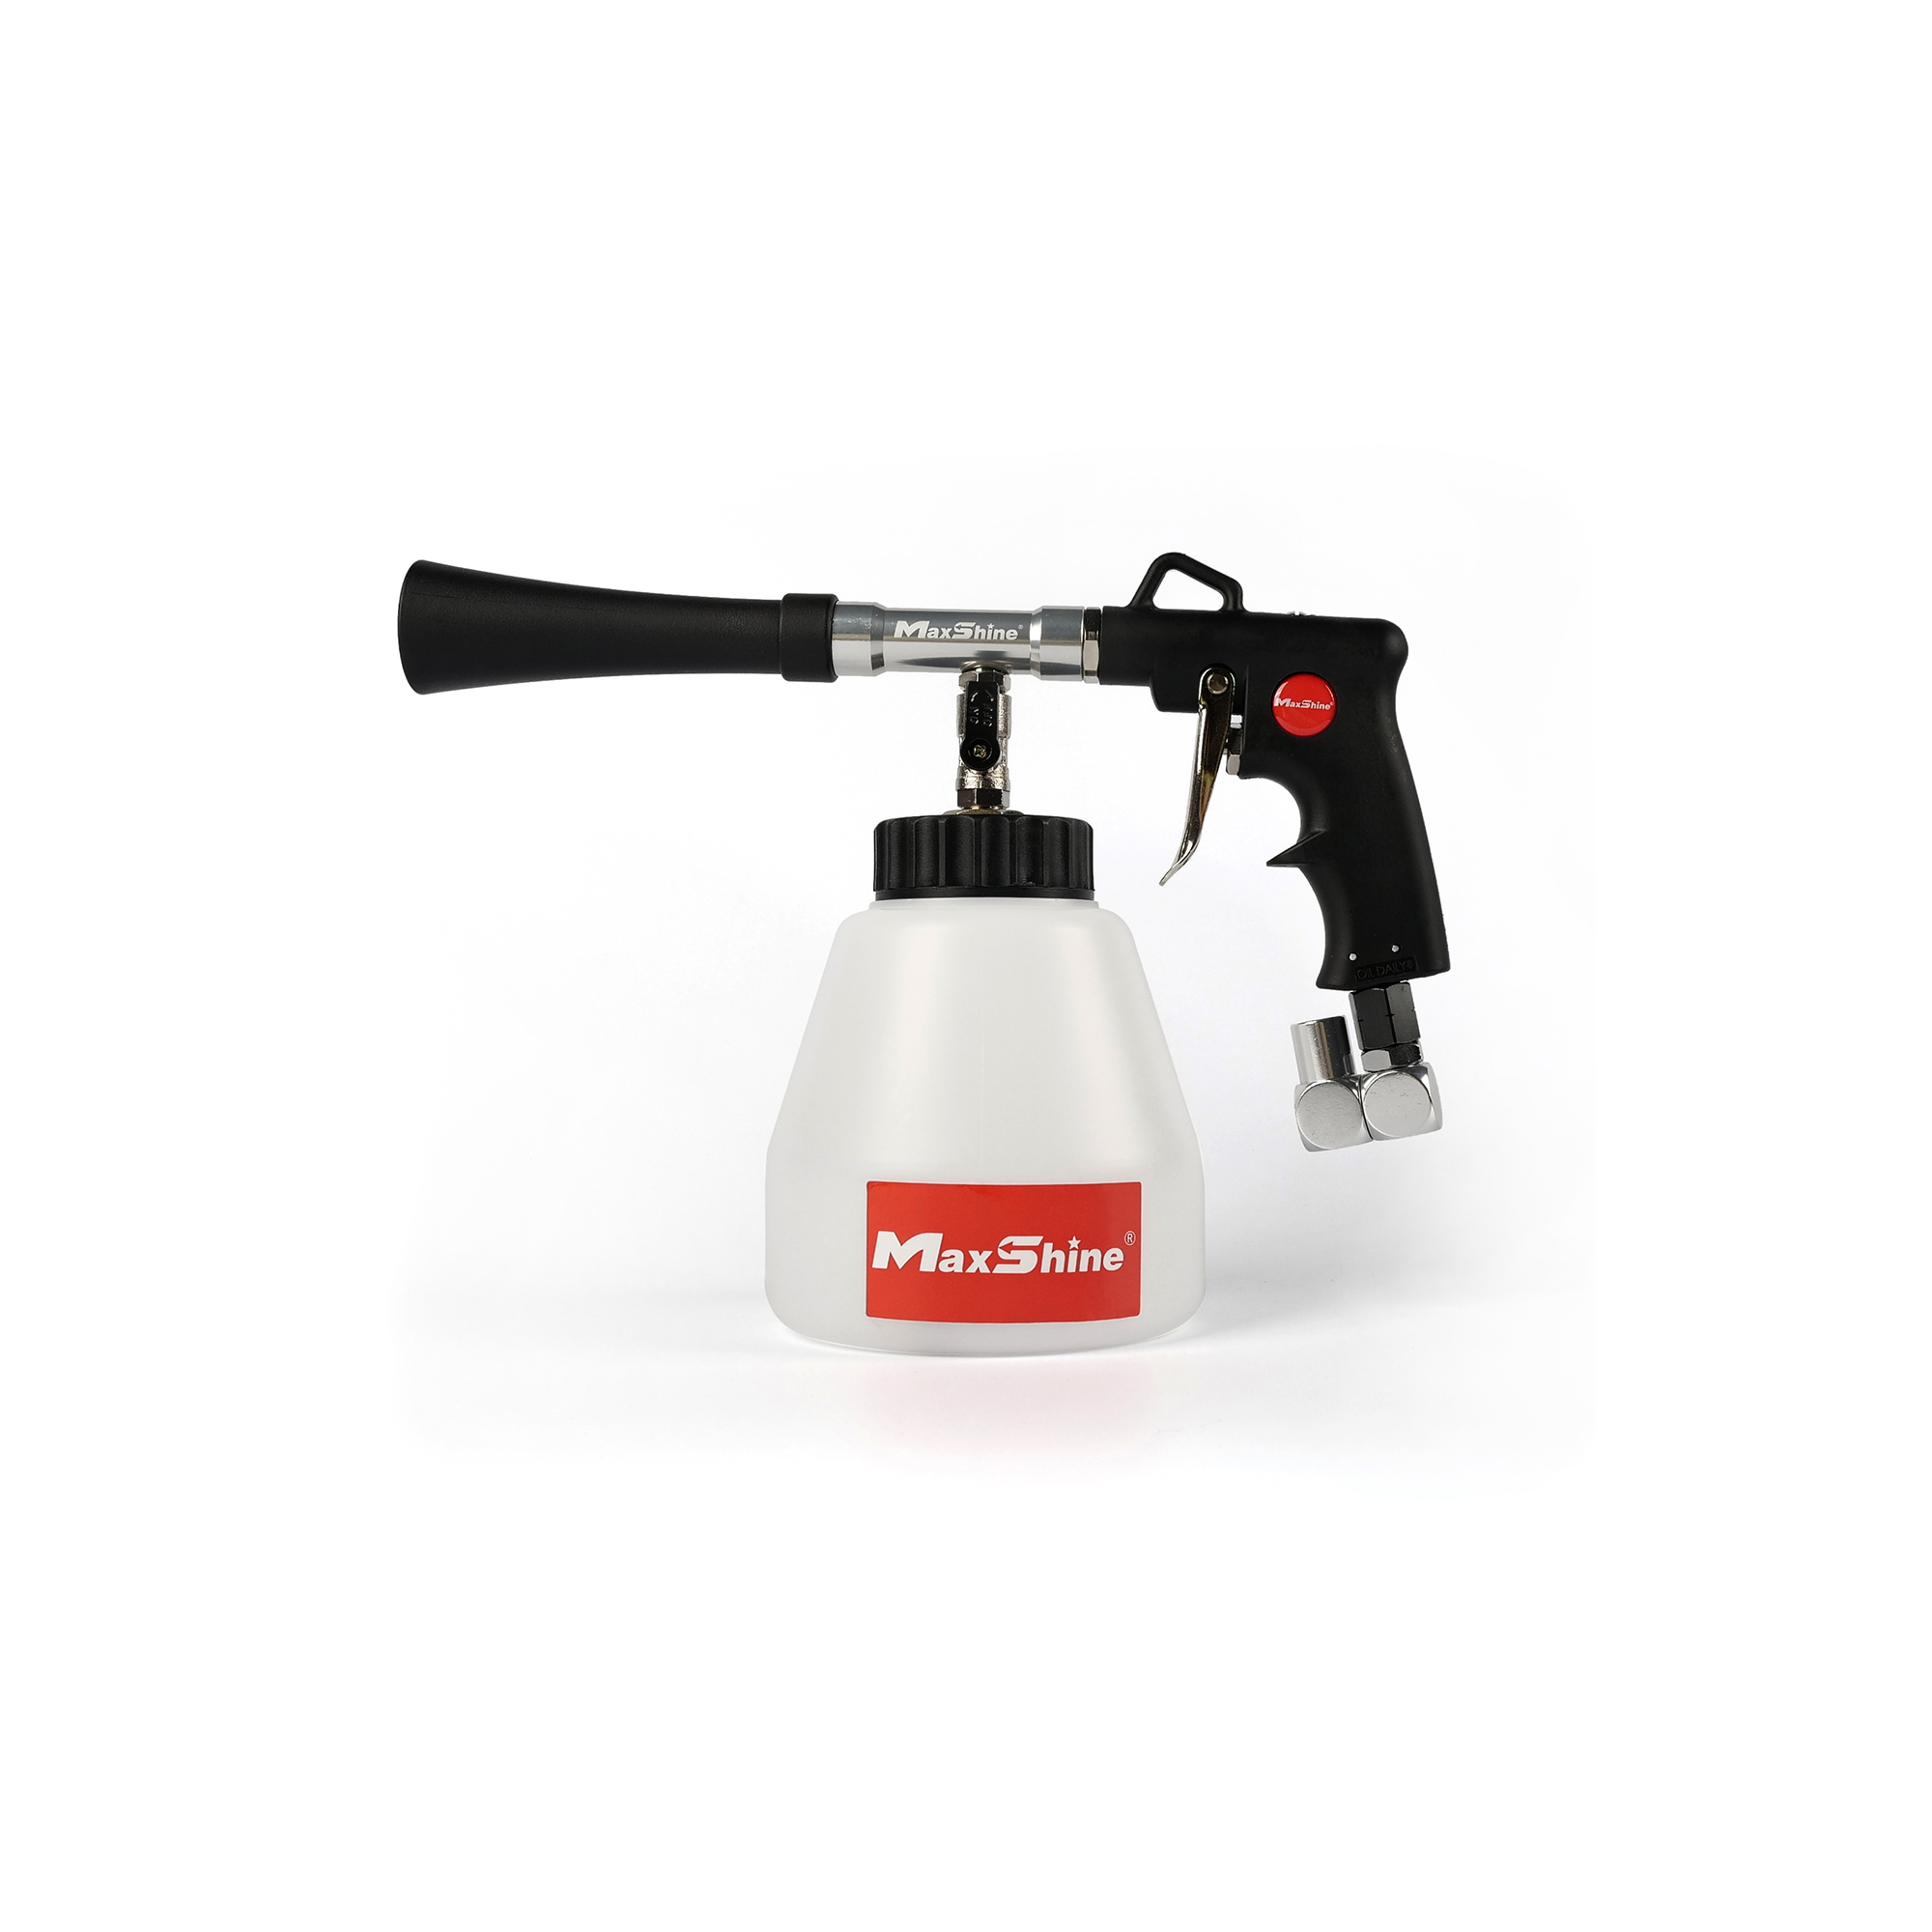 Maxshine Car Air Cleaning Gun -1000ml - Maxshine Car Care-Polishers,  Towels, Brushes, Deatailing Products